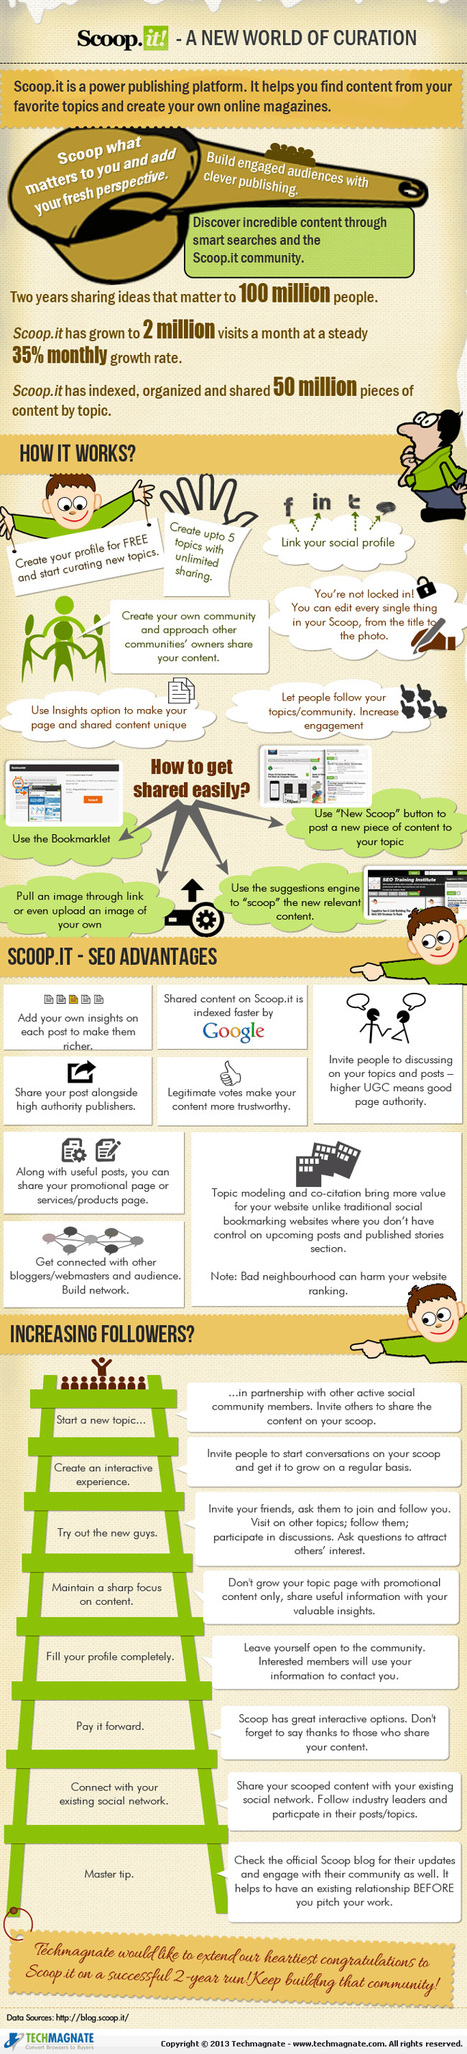 Scoop.It for SEO – A New World of Curation [Infographic] | :: The 4th Era :: | Scoop.it